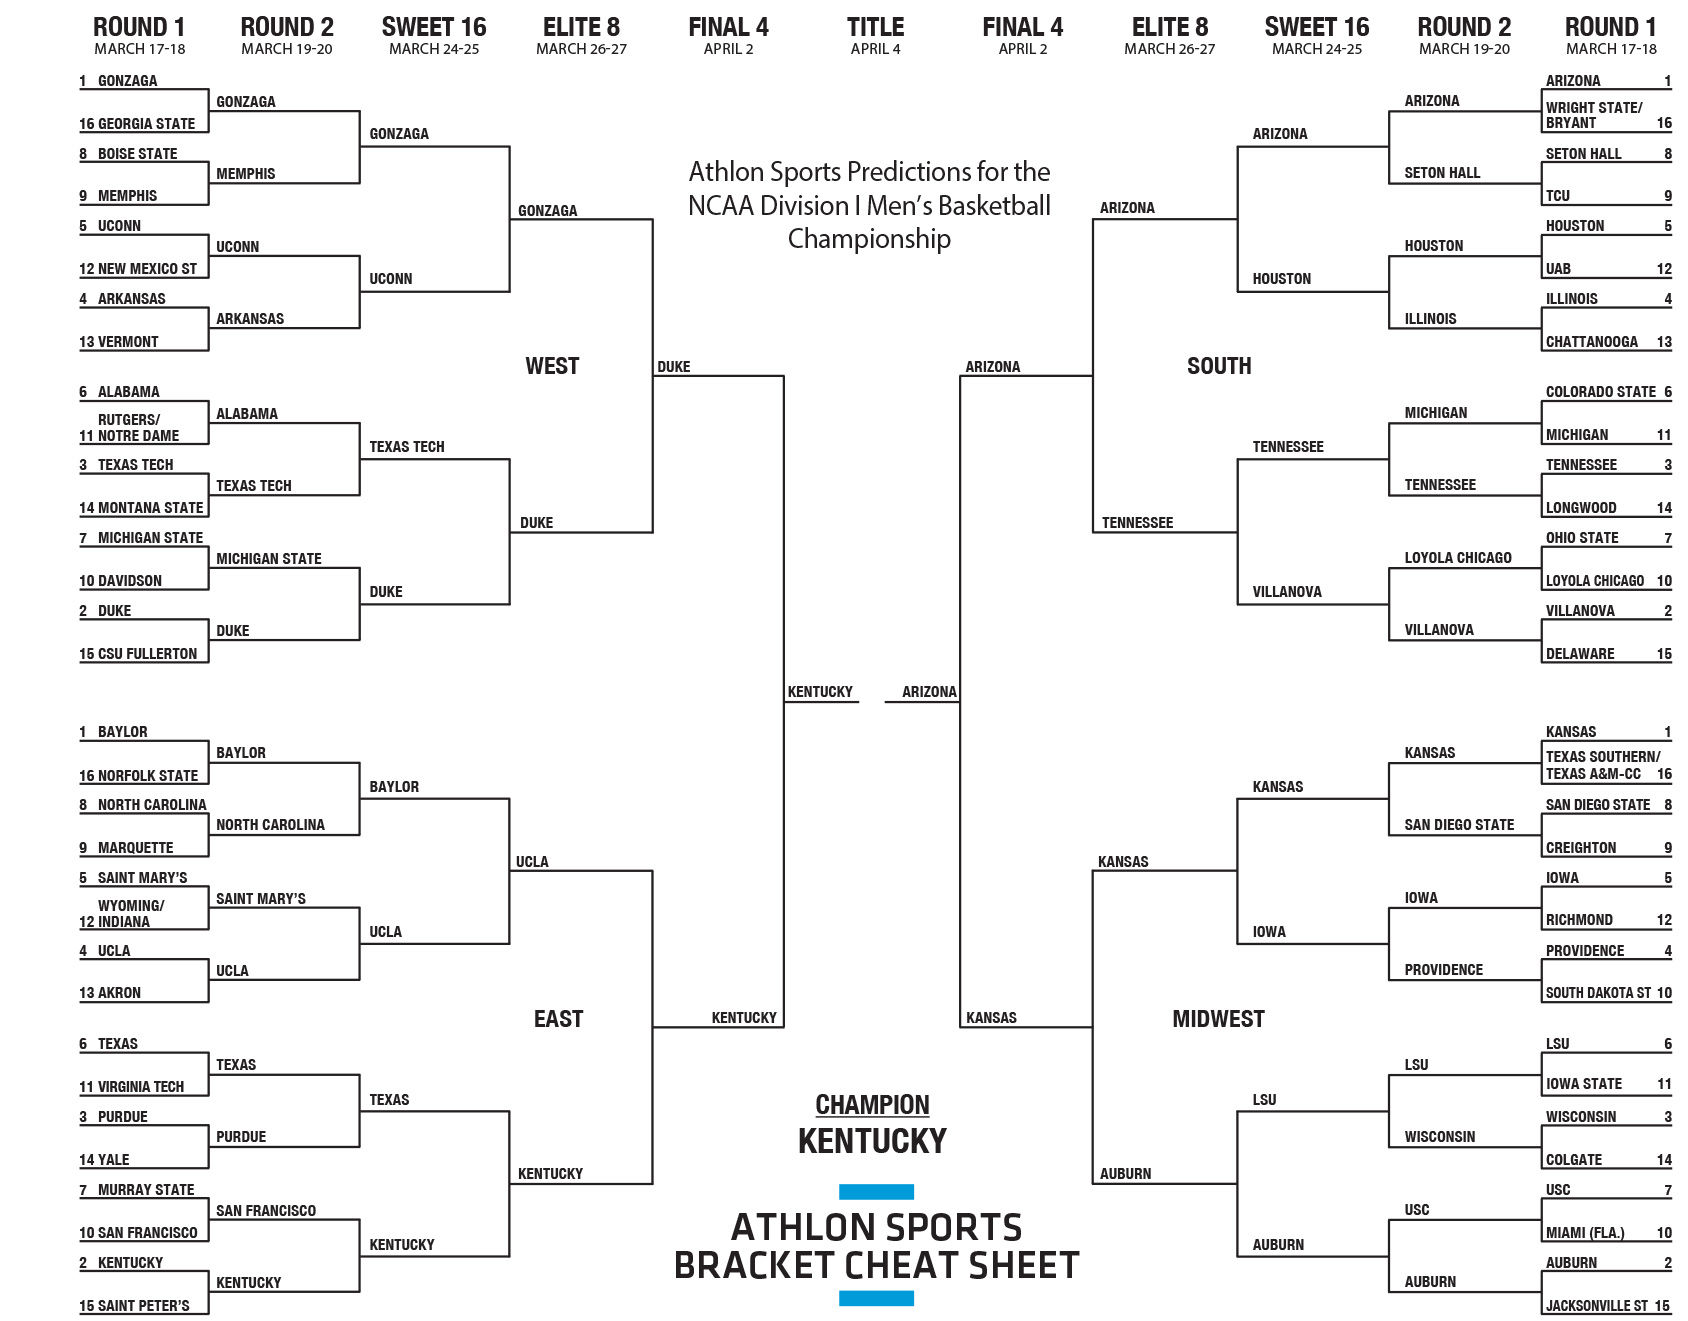 NCAA Bracket Cheat Sheets Predictions for 2022 March Madness